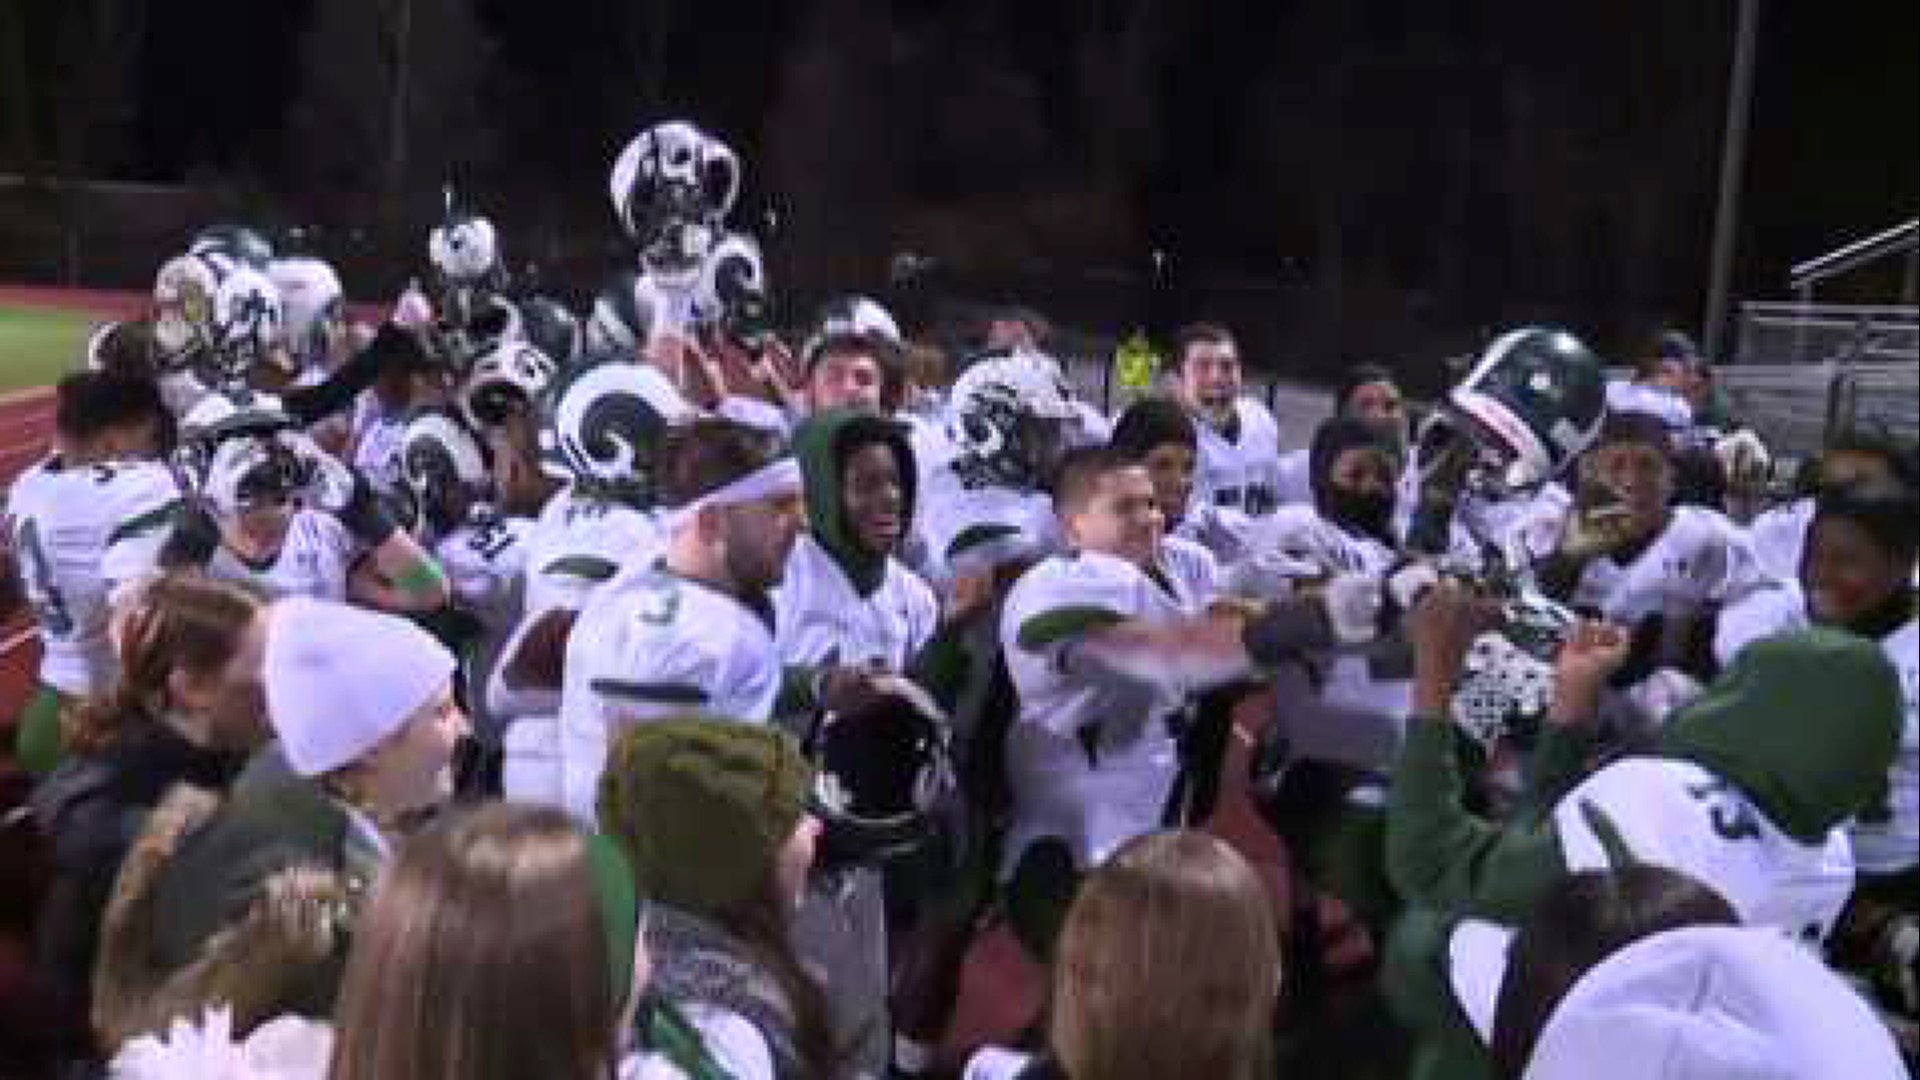 HSFF 2019 Central Dauphin scores 65 points and advances to PIAA 6A Championship